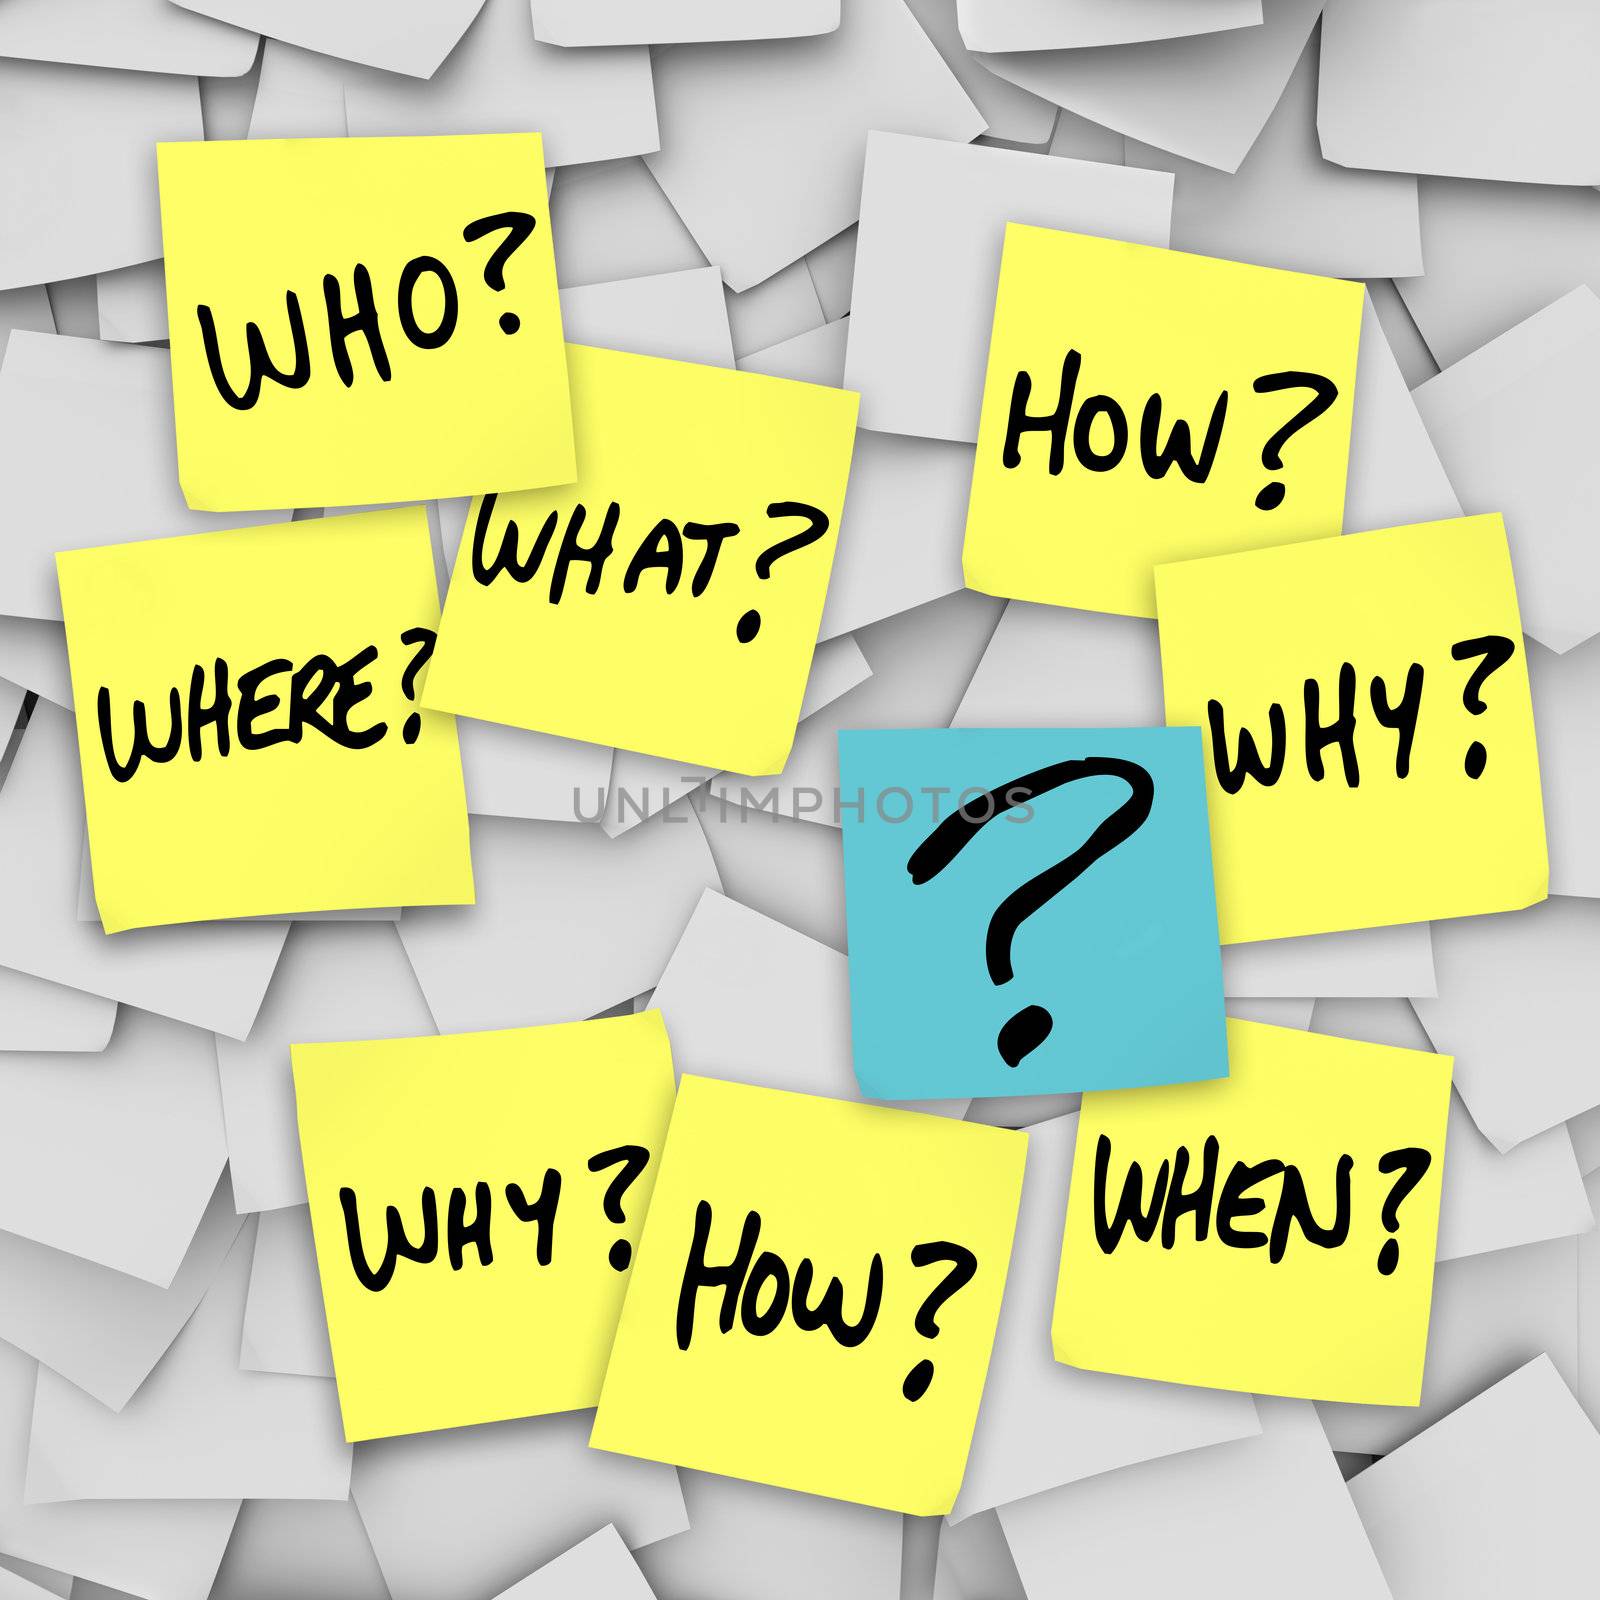 Questions and Question Mark - Sticky Note Confusion by iQoncept